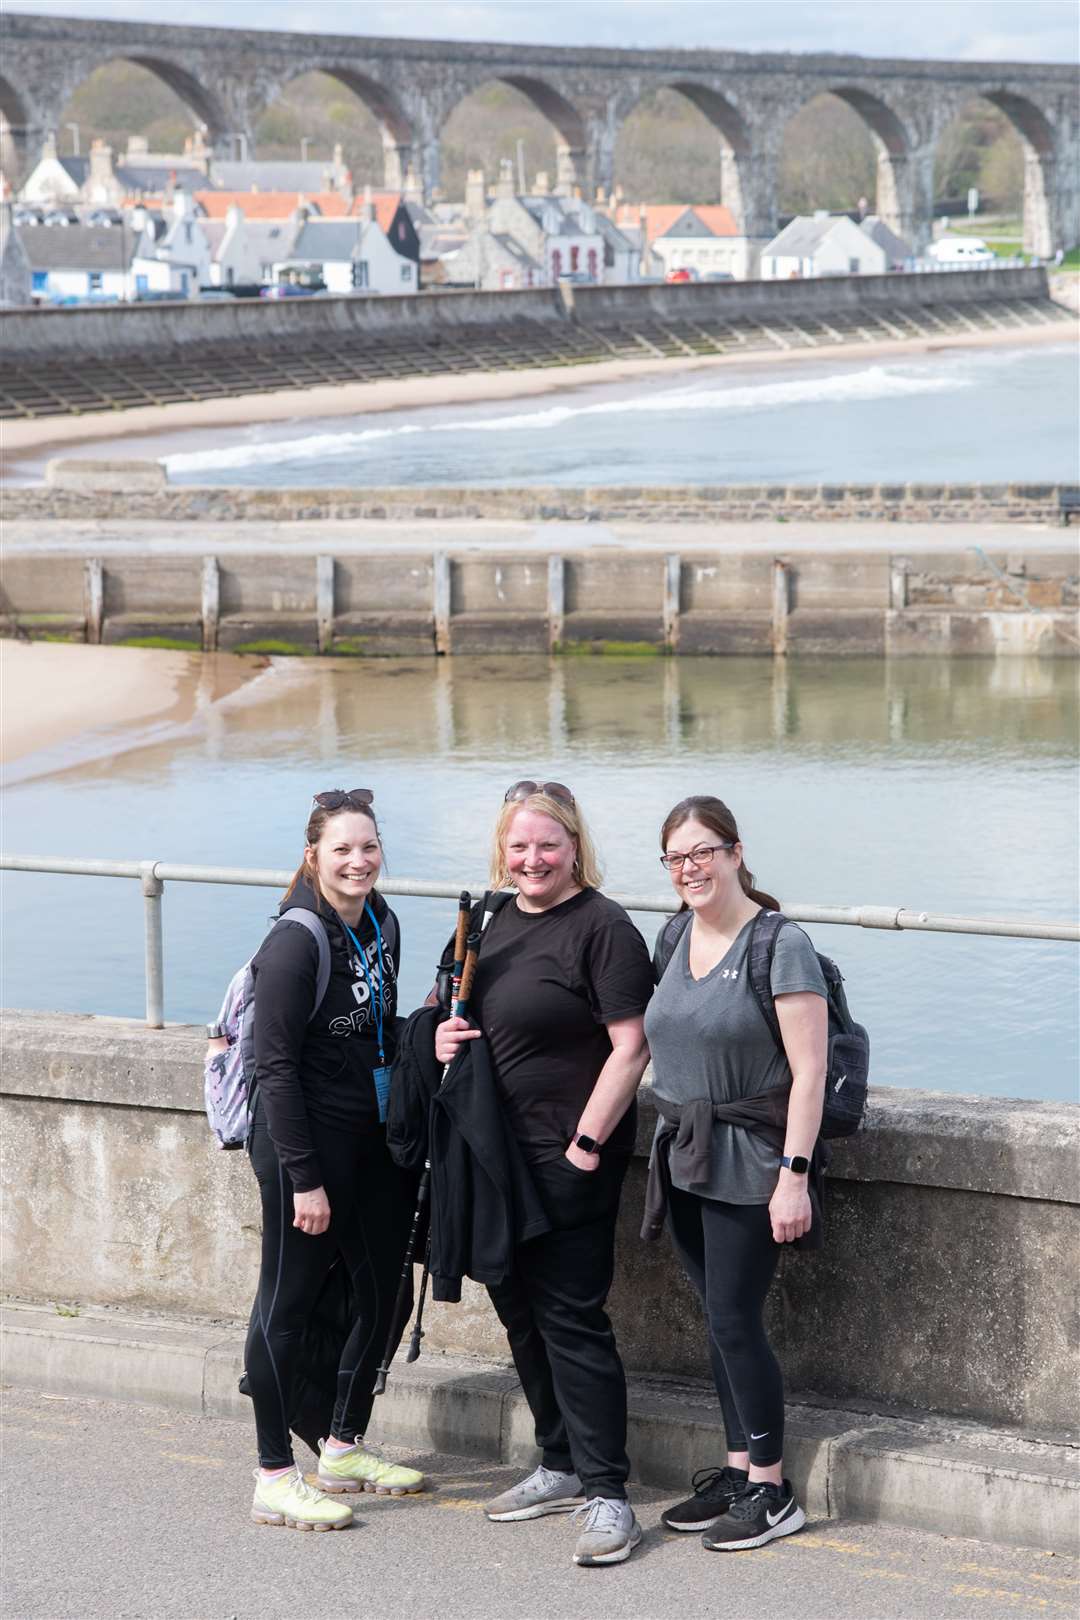 A trio of friends pause for a photo with the iconic Cullen viaducts in the background. Picture: Daniel Forsyth